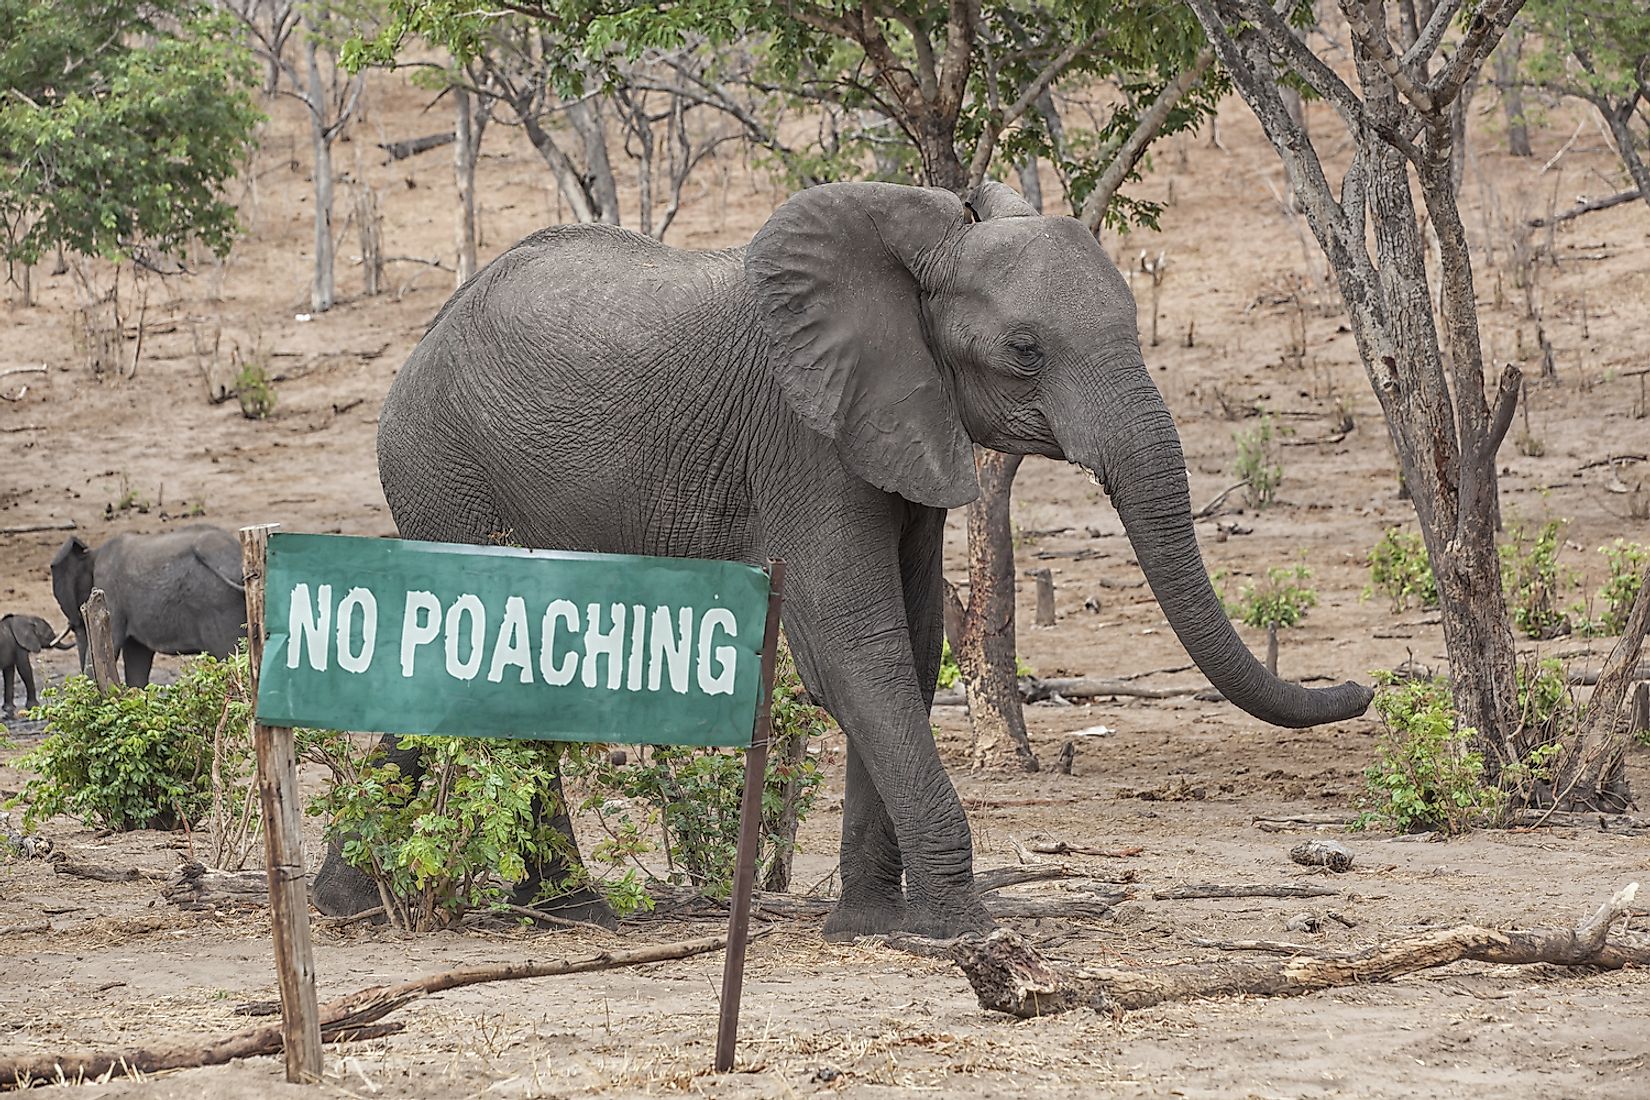 Poaching of wildlife for illegal wildlife trade is one of the biggest threats to the world's wildlife. Image credit:  Michael Wick/Shutterstock.com